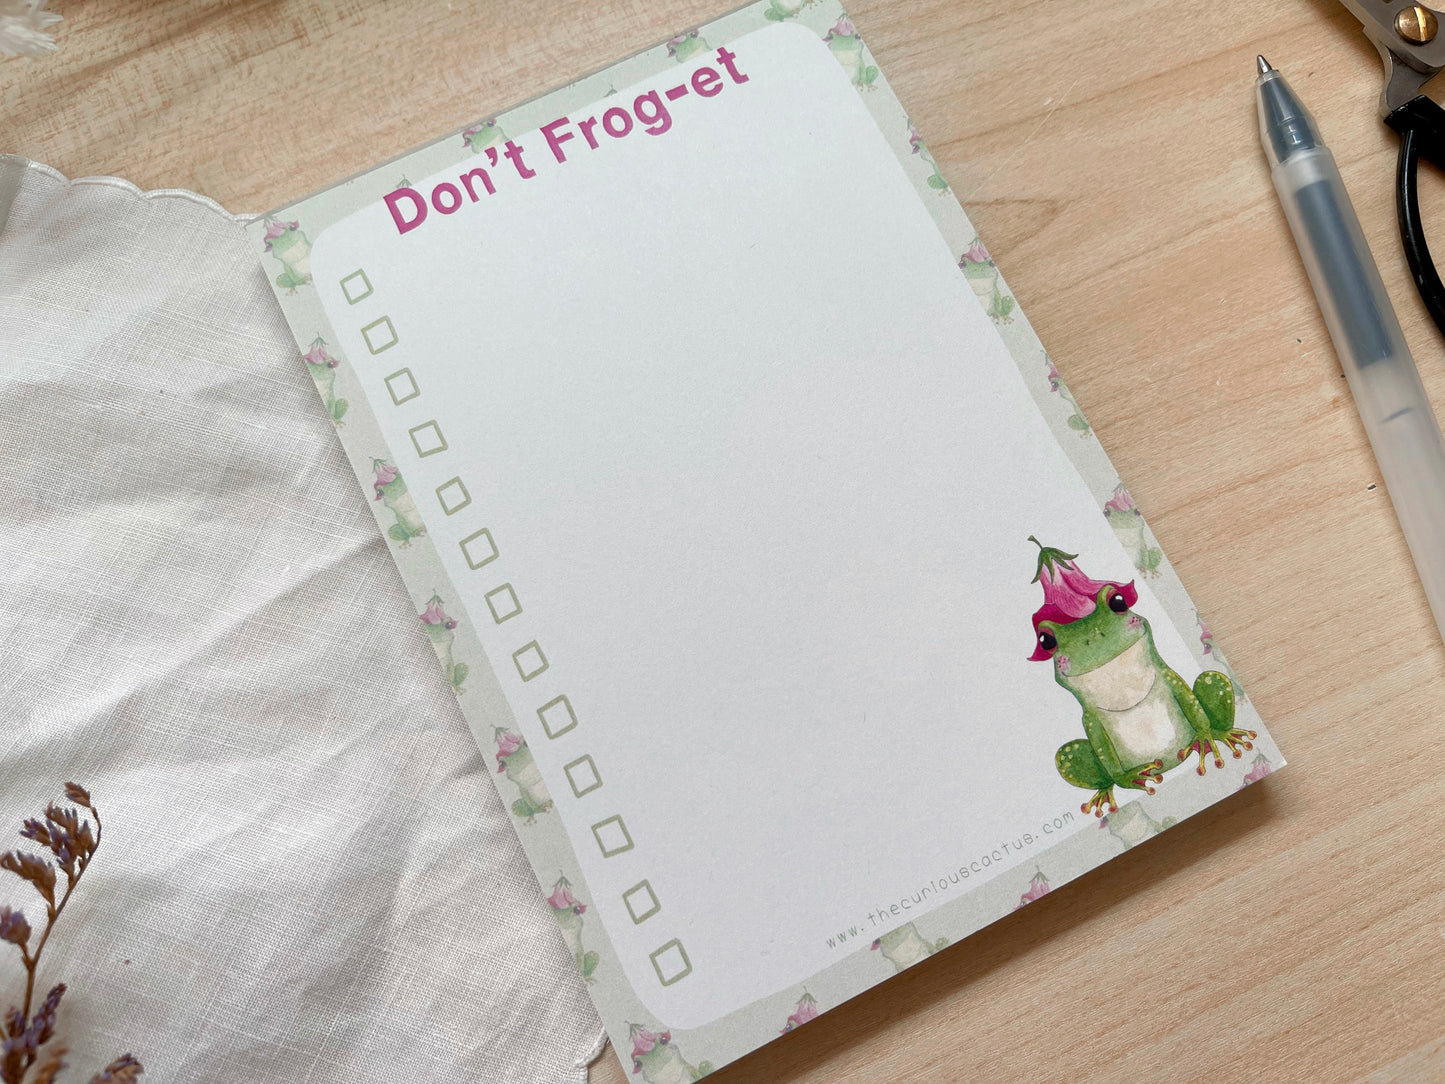 Don't Froget A6 Notepad